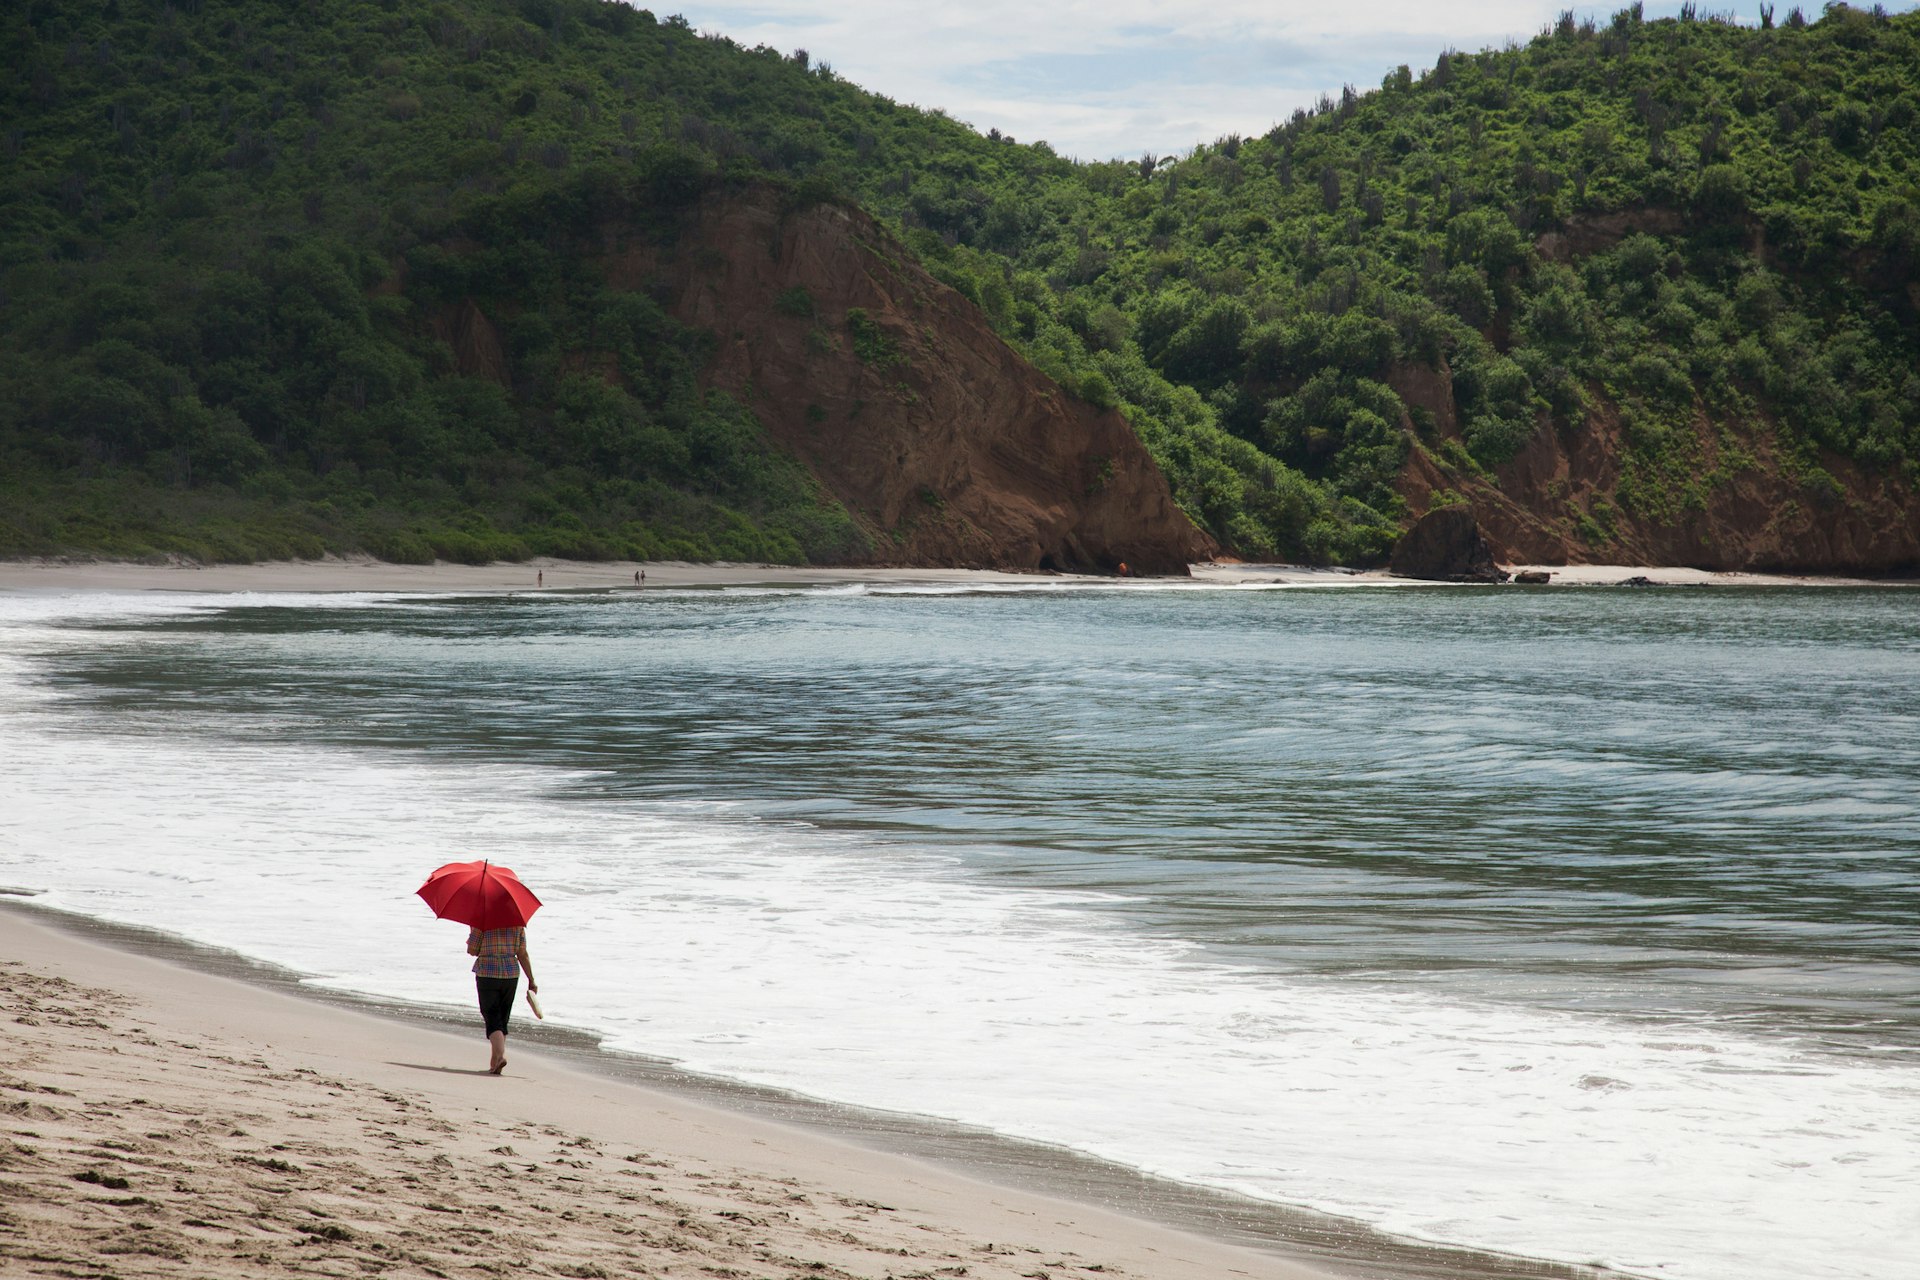 Woman with red umbrella strolls along a beach on a cloudy day